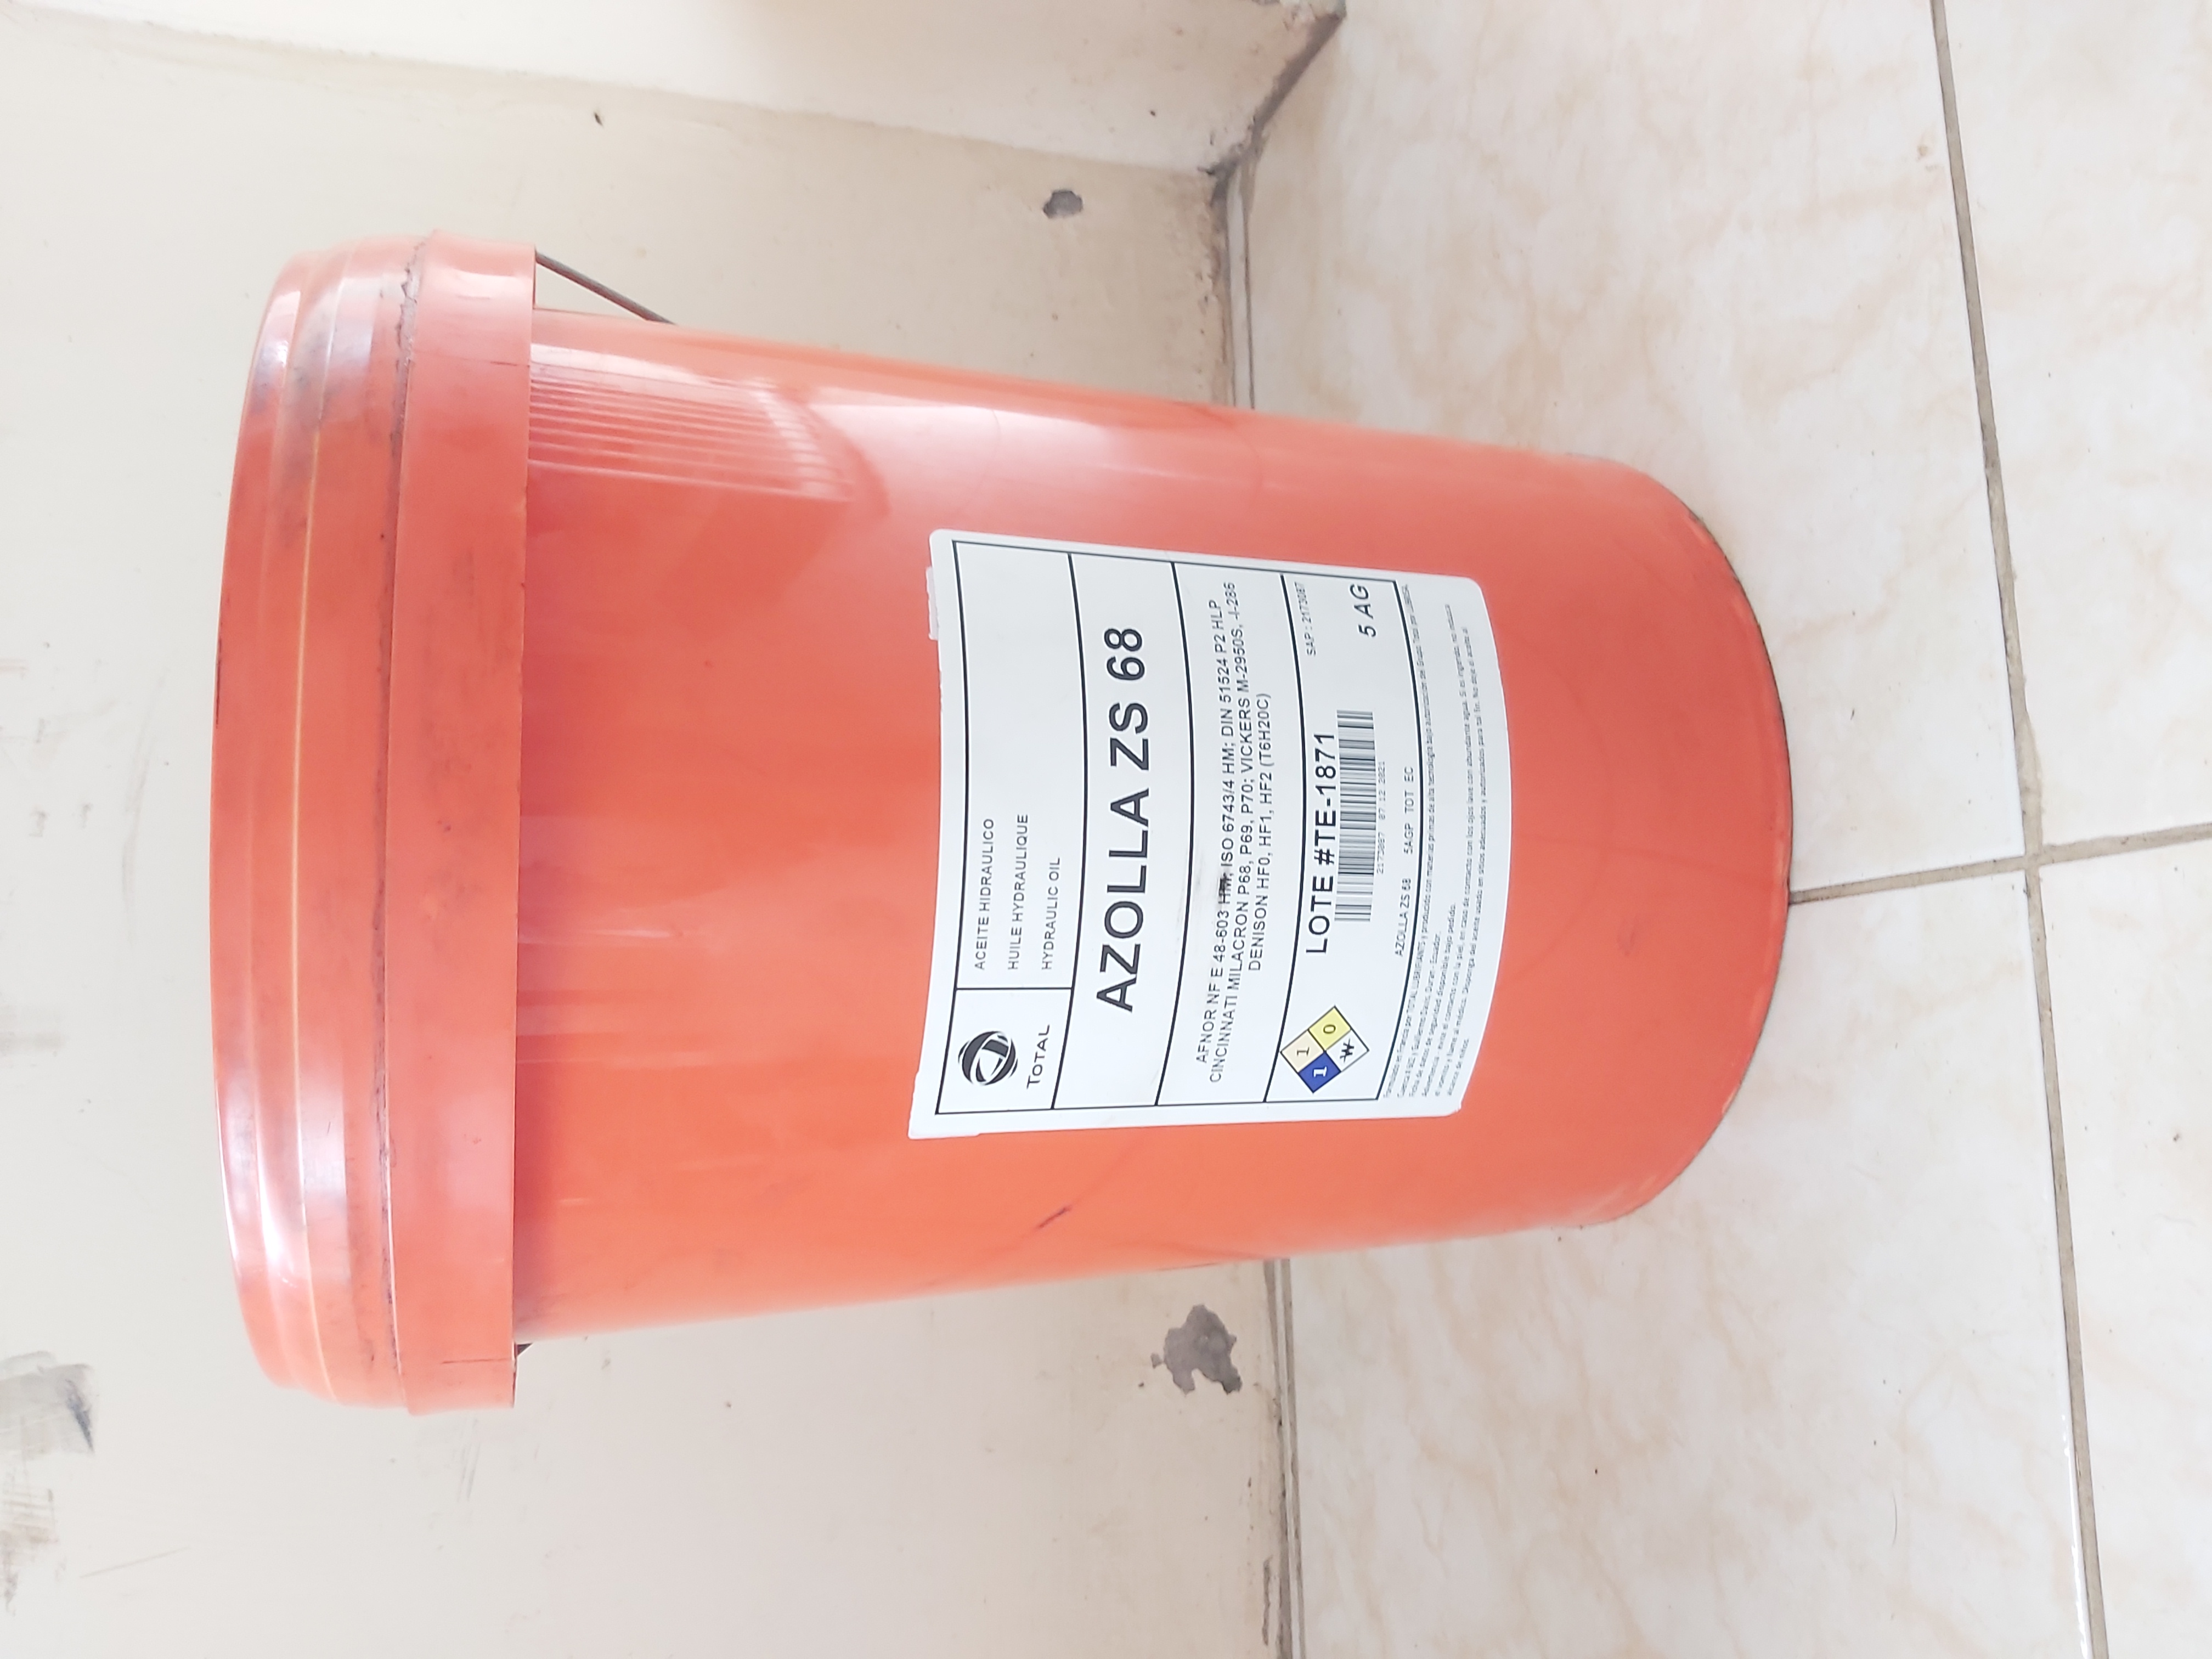 AZZOLA 68 TOTAL ISO 68 ACEITE HIDRAULICO 5 gal